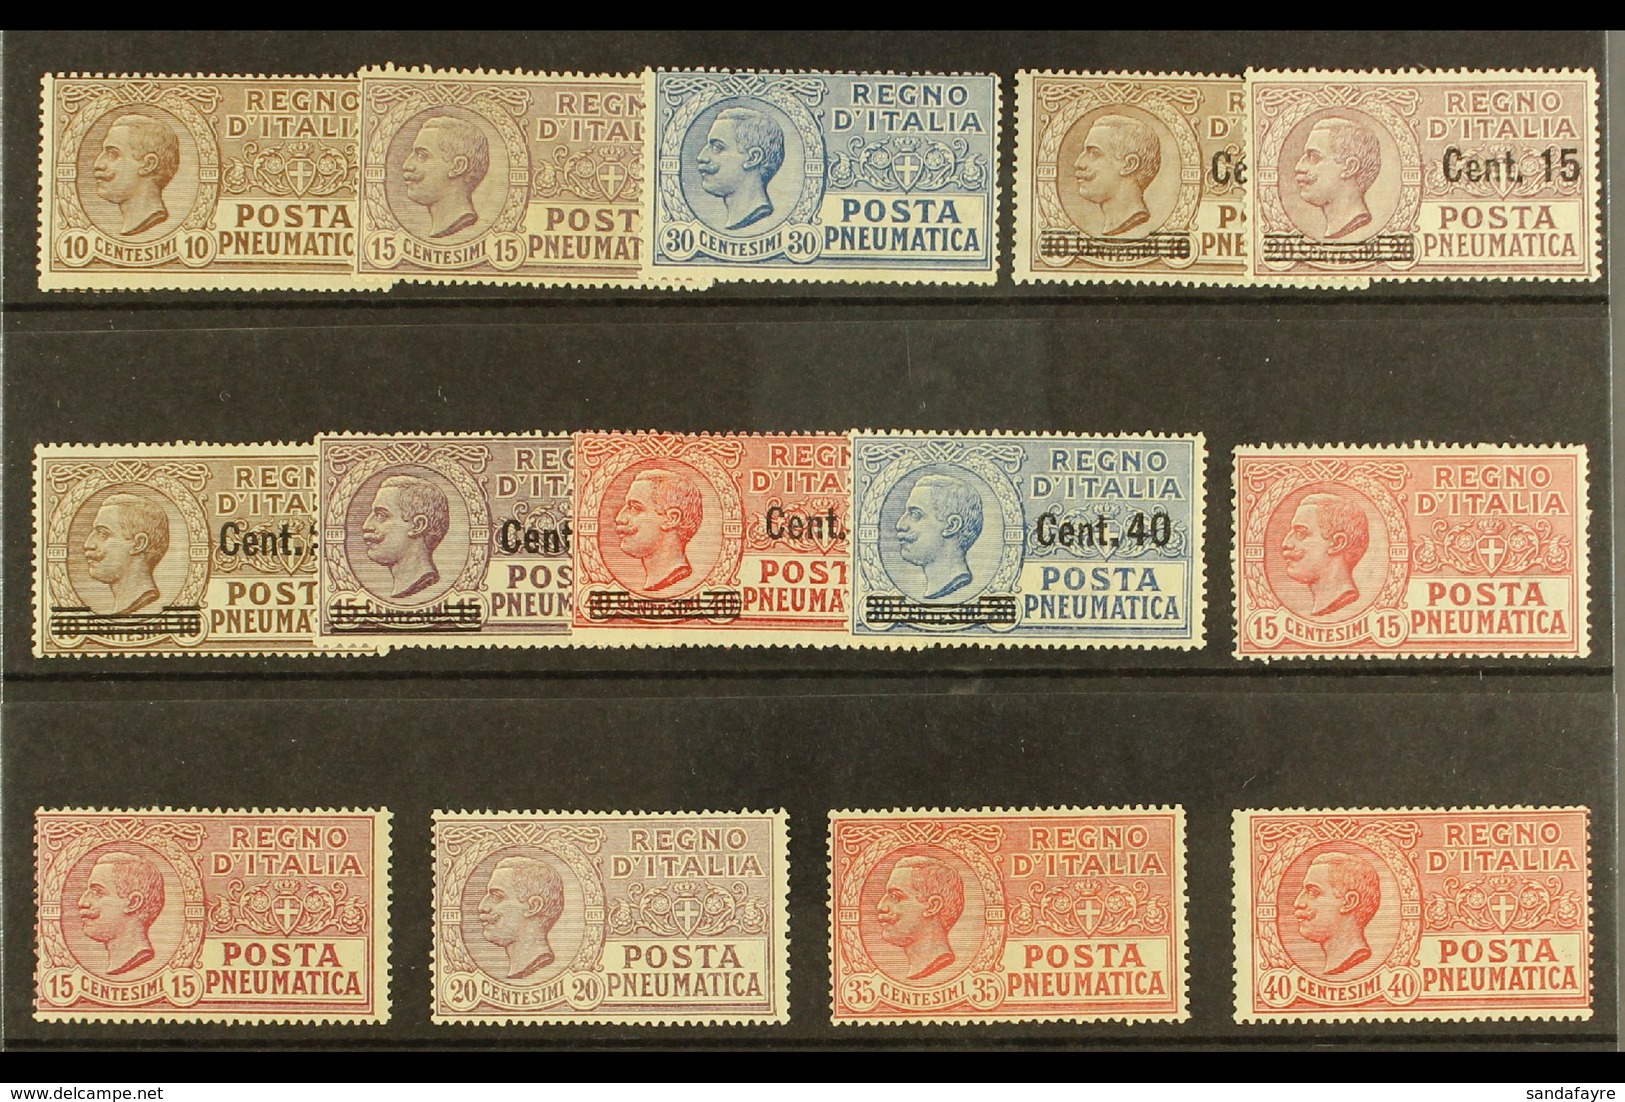 PNEUMATIC POST 1913-1928 Complete Run (SG PE96/98, 165/70 & 191/95) Fine Fresh Mint. (14 Stamps)  For More Images, Pleas - Unclassified